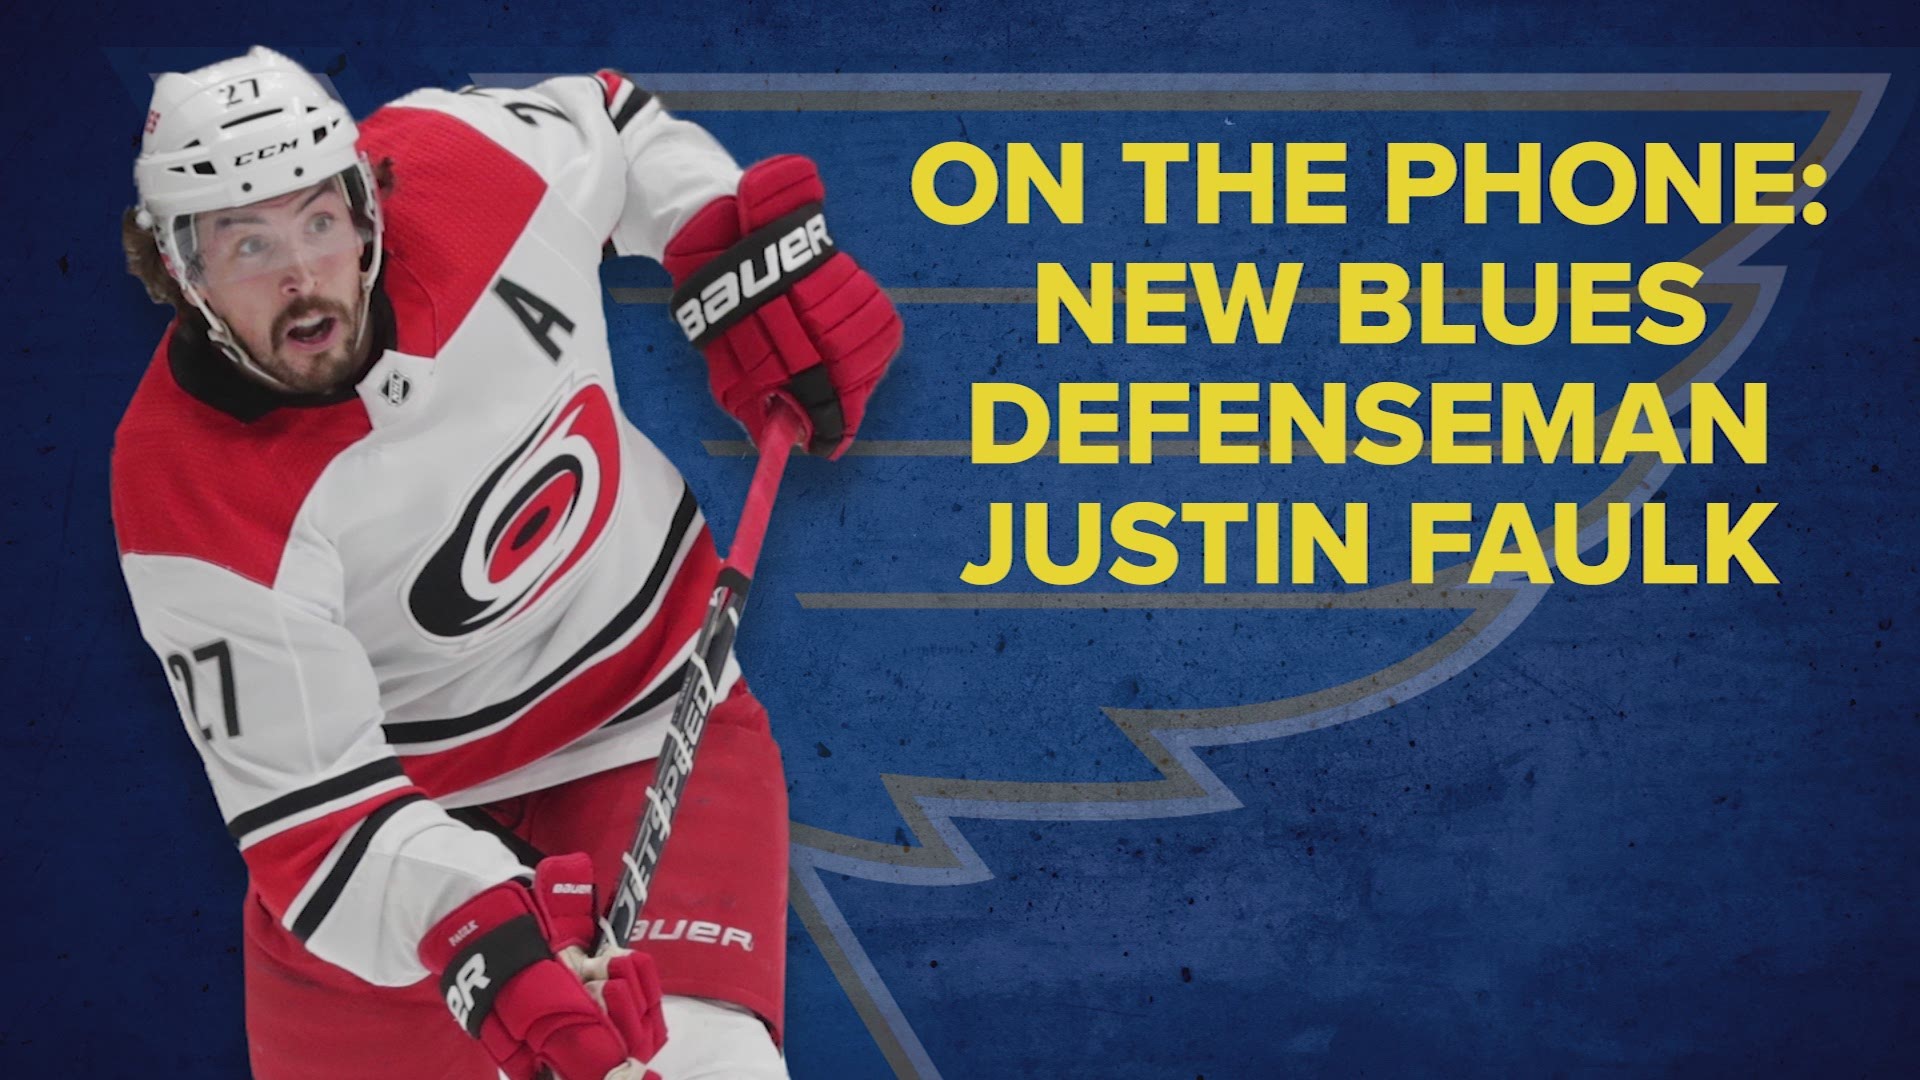 Faulk is heading to the Blues in a package that includes defenseman Joel Edmundson.